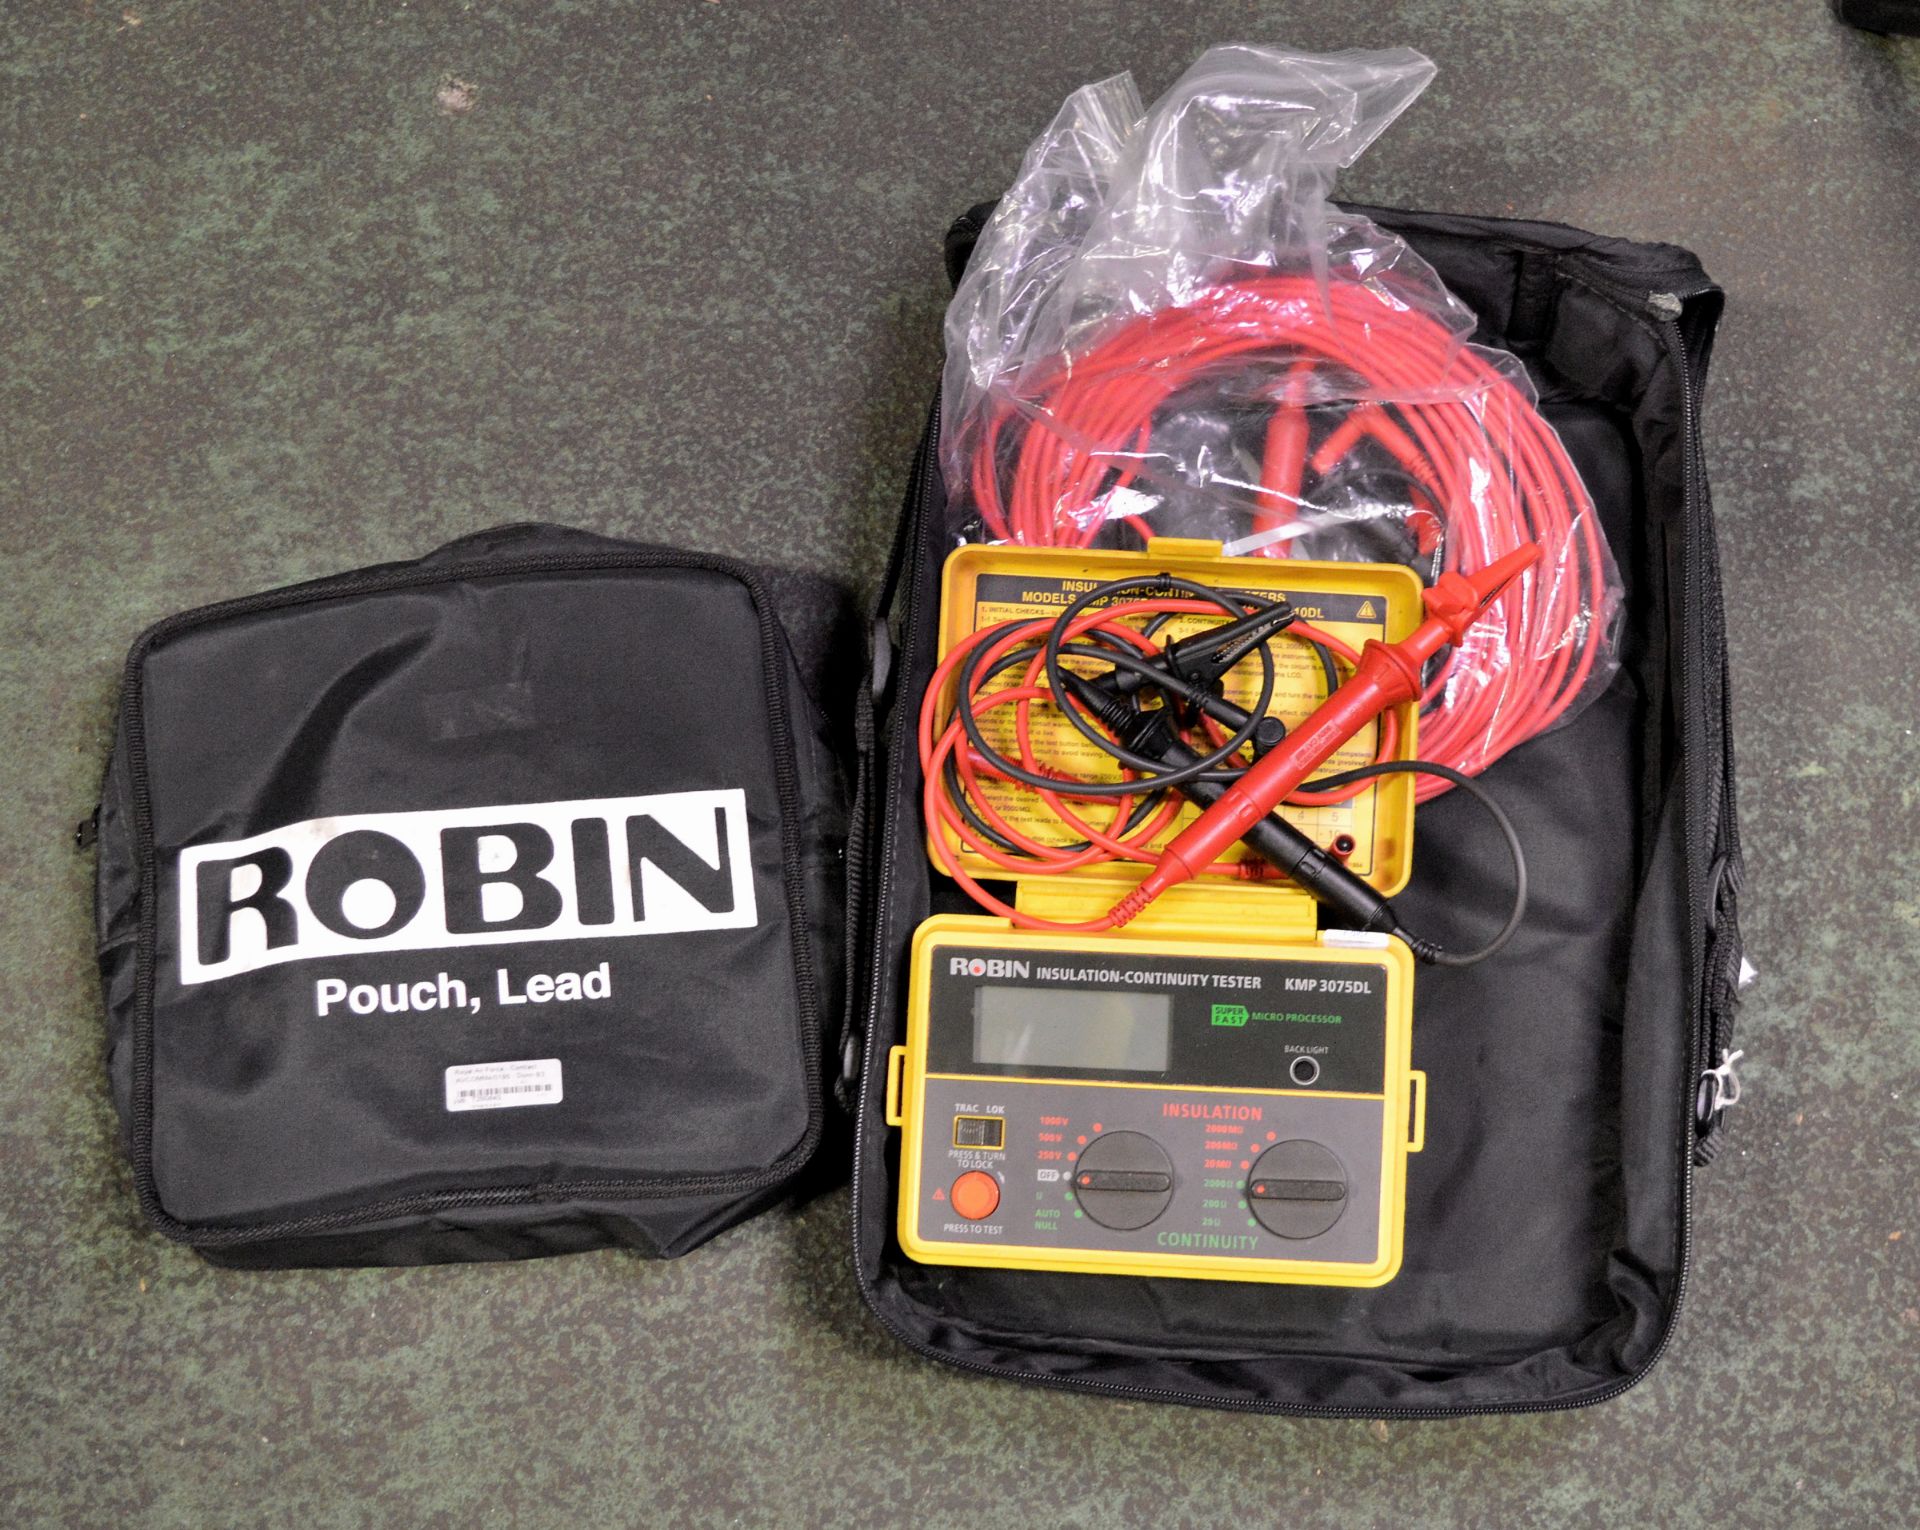 Robin Insulation Continuity Tester Model 3075DL in carry bag